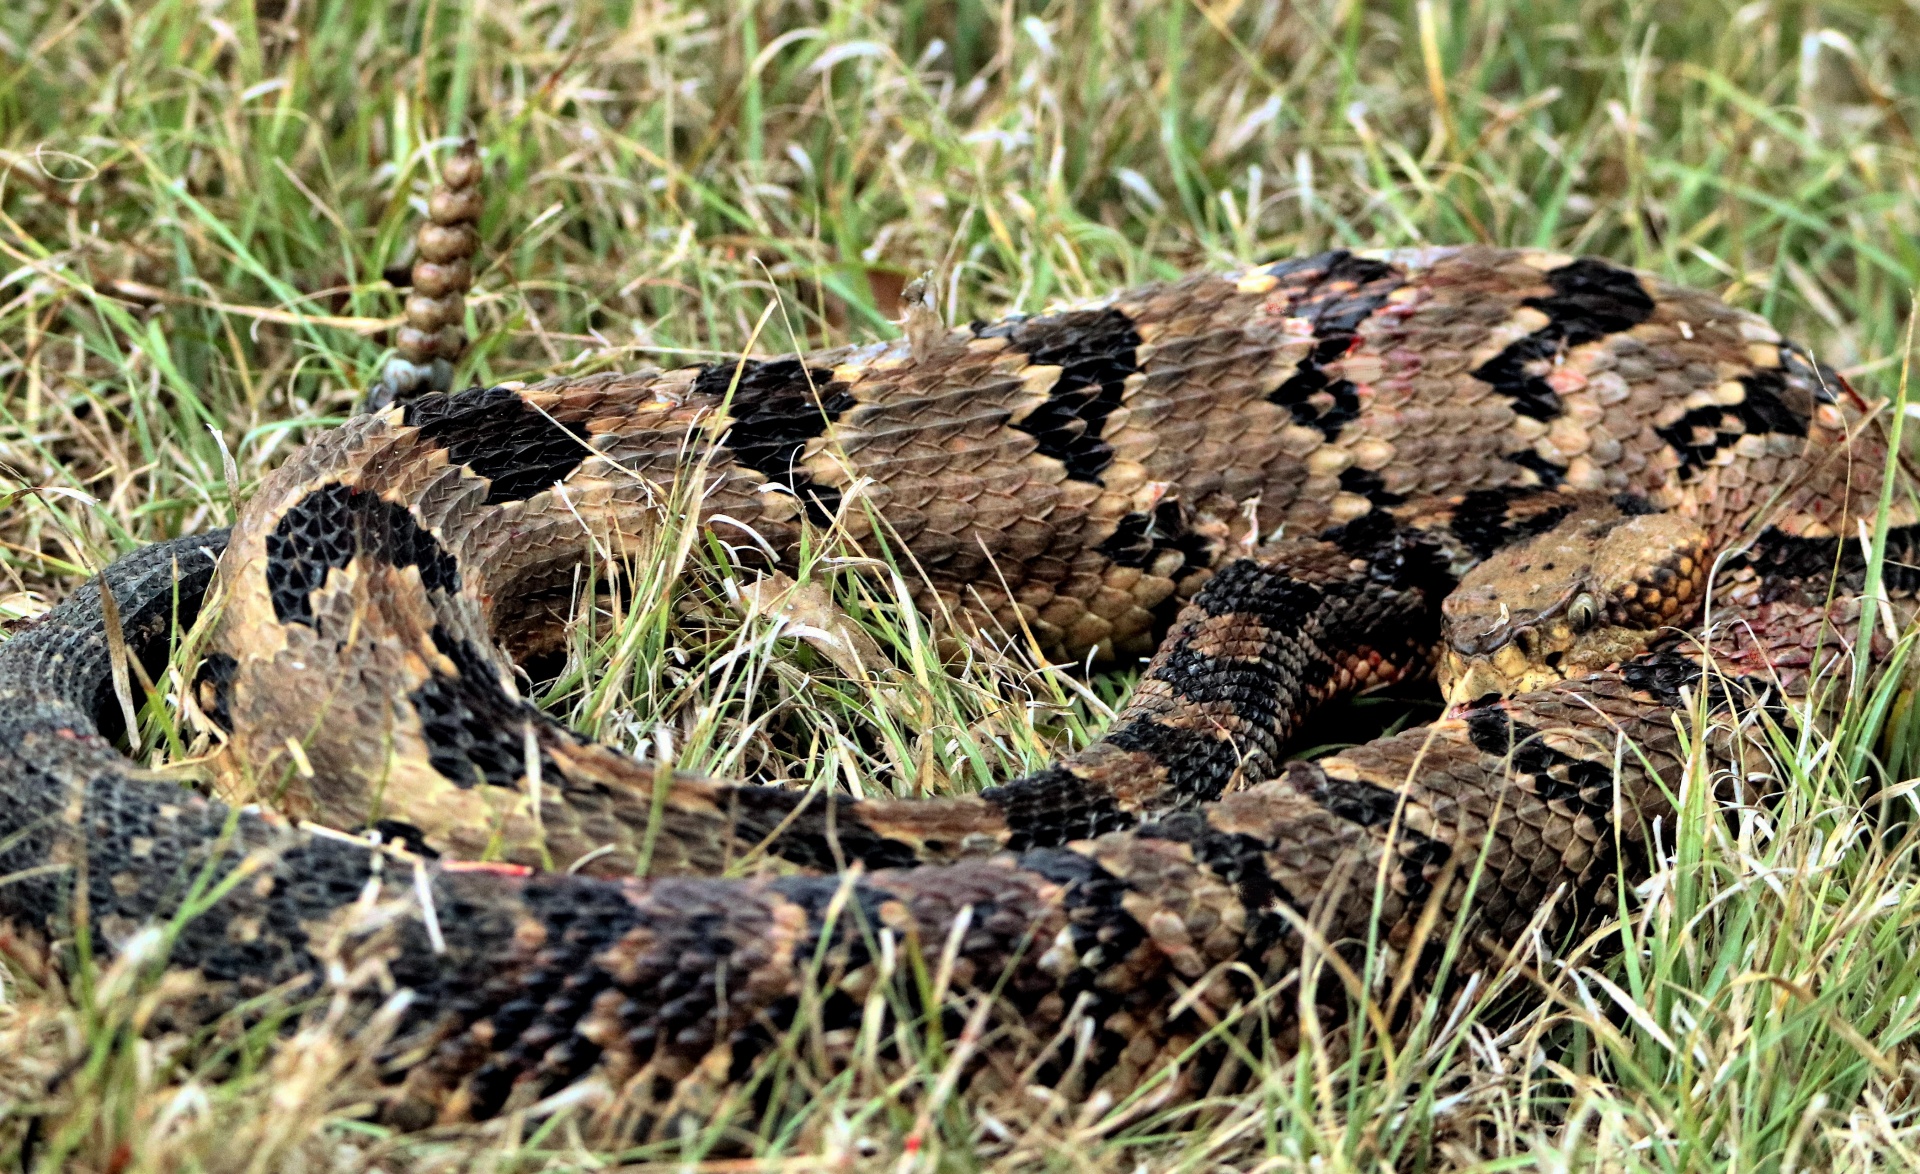 Close-up of a velvet tail rattlesnake, curled up in a green grassy field.